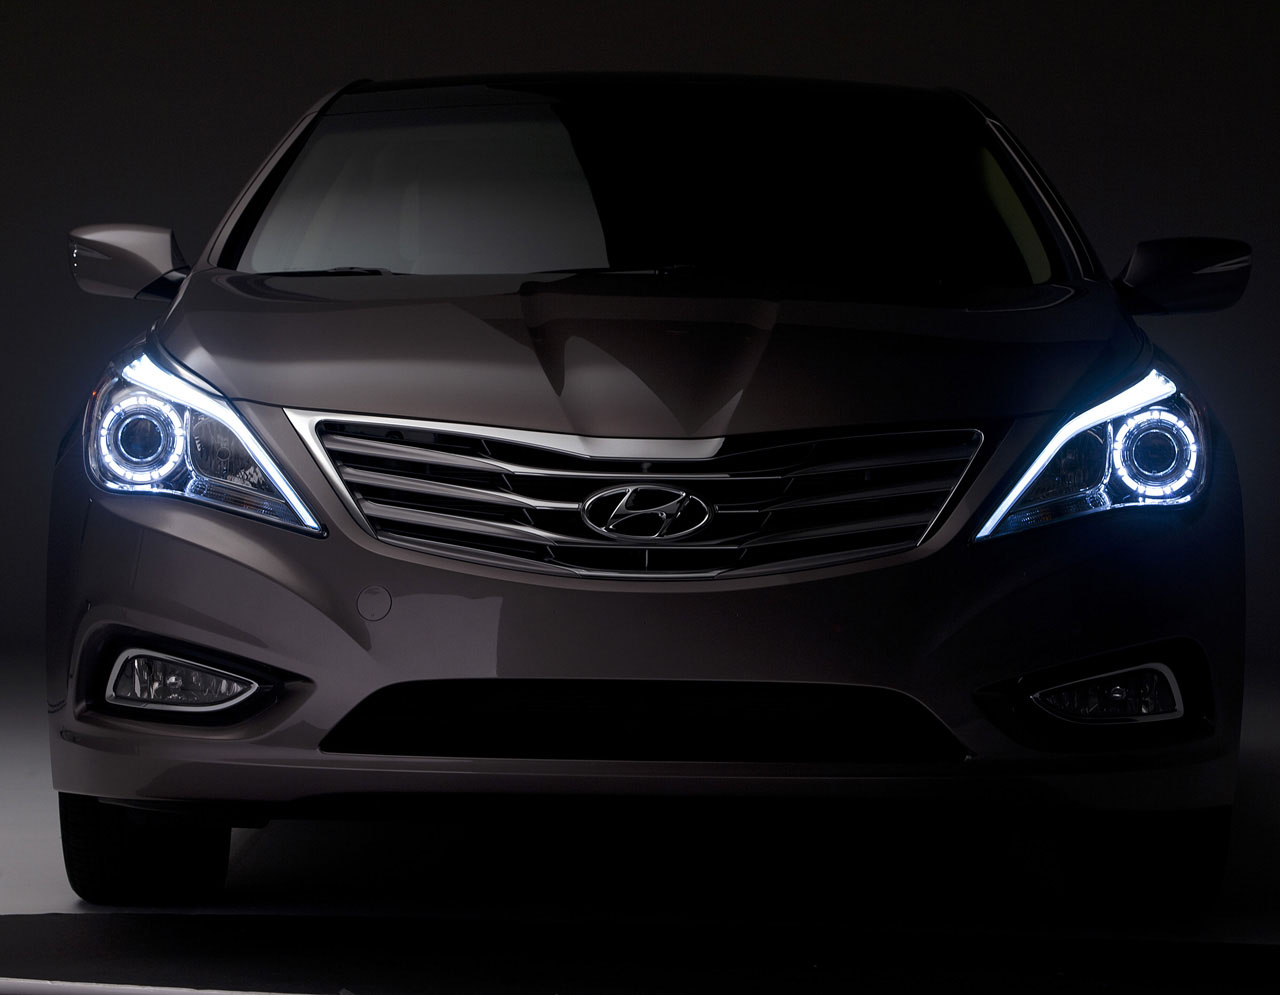 2012 Hyundai Azera priced from $32,000 and Gen Coupe from $24,250 ...